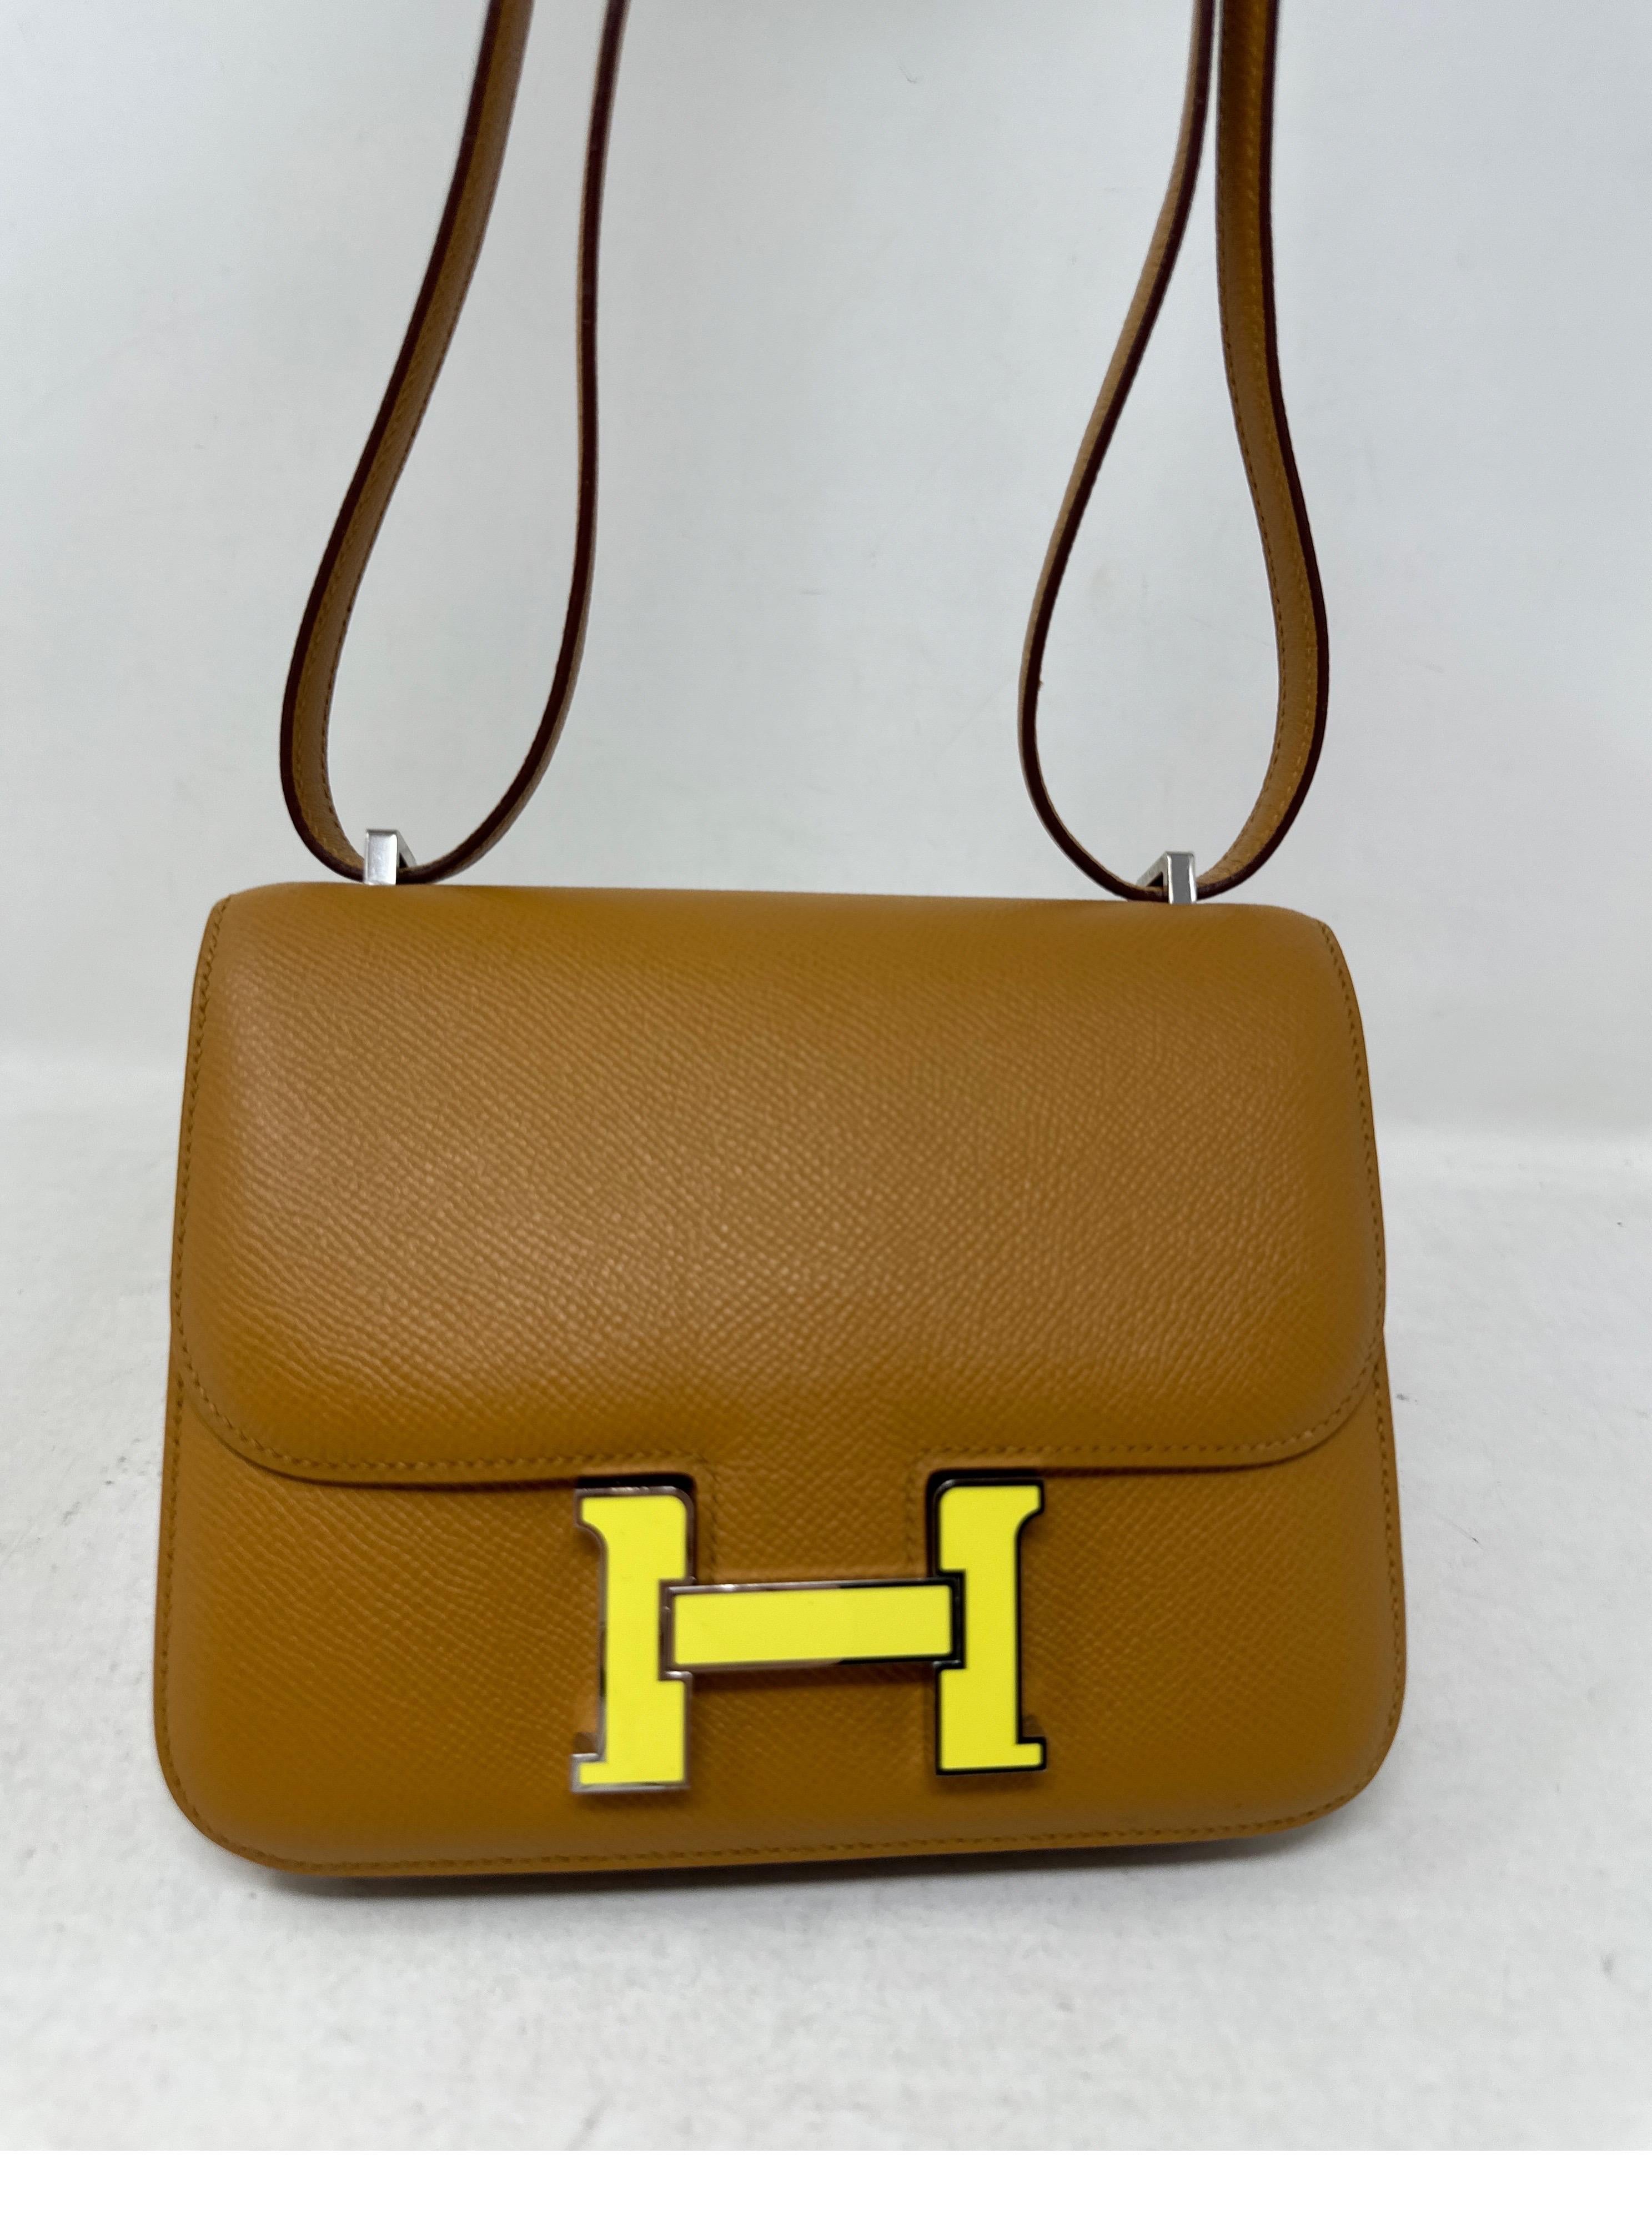 Hermes Gold Constance 18 Bag. Gold tan color epsom leather bag. Can be worn crossbody or doubled as a shoulder bag. Yellow enamel hardware H clasp. Excellent like condition. Interior clean. Includes dust bag and box. Guaranteed authentic. 